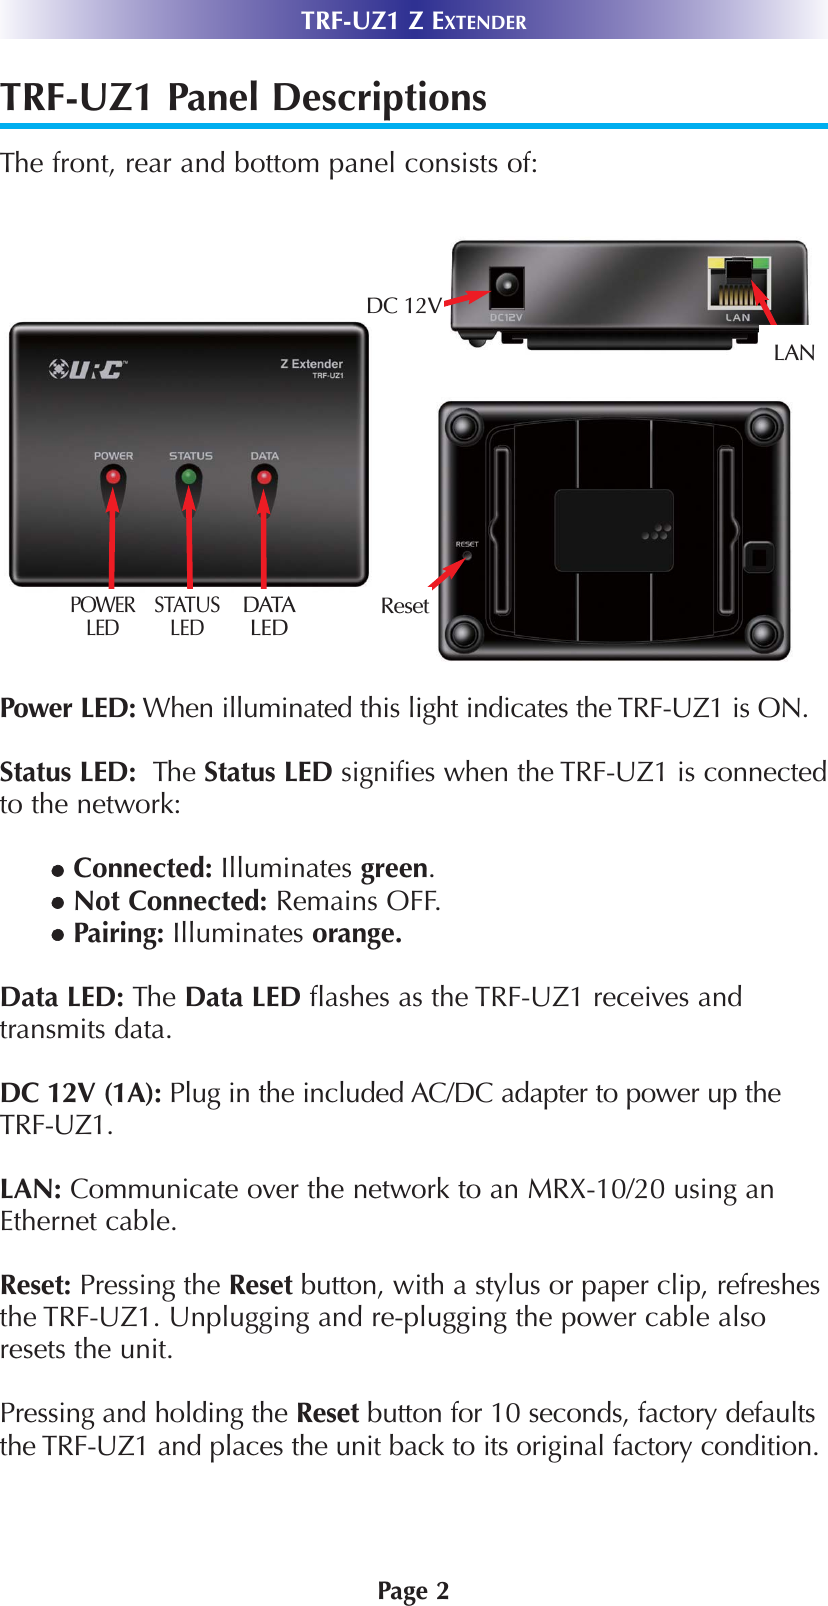 TRF-UZ1 Panel DescriptionsThe front, rear and bottom panel consists of:    Power LED: When illuminated this light indicates the TRF-UZ1 is ON.Status LED:  The Status LED signifies when the TRF-UZ1 is connectedto the network: Connected: Illuminates green. Not Connected: Remains OFF.Pairing: Illuminates orange.Data LED: The Data LED flashes as the TRF-UZ1 receives andtransmits data.DC 12V (1A): Plug in the included AC/DC adapter to power up theTRF-UZ1.LAN: Communicate over the network to an MRX-10/20 using anEthernet cable. Reset: Pressing the Reset button, with a stylus or paper clip, refreshesthe TRF-UZ1. Unplugging and re-plugging the power cable alsoresets the unit.  Pressing and holding the Reset button for 10 seconds, factory defaultsthe TRF-UZ1 and places the unit back to its original factory condition.Page 2TRF-UZ1 Z EXTENDERPOWERLED STATUSLEDDATALEDDC 12VLANReset